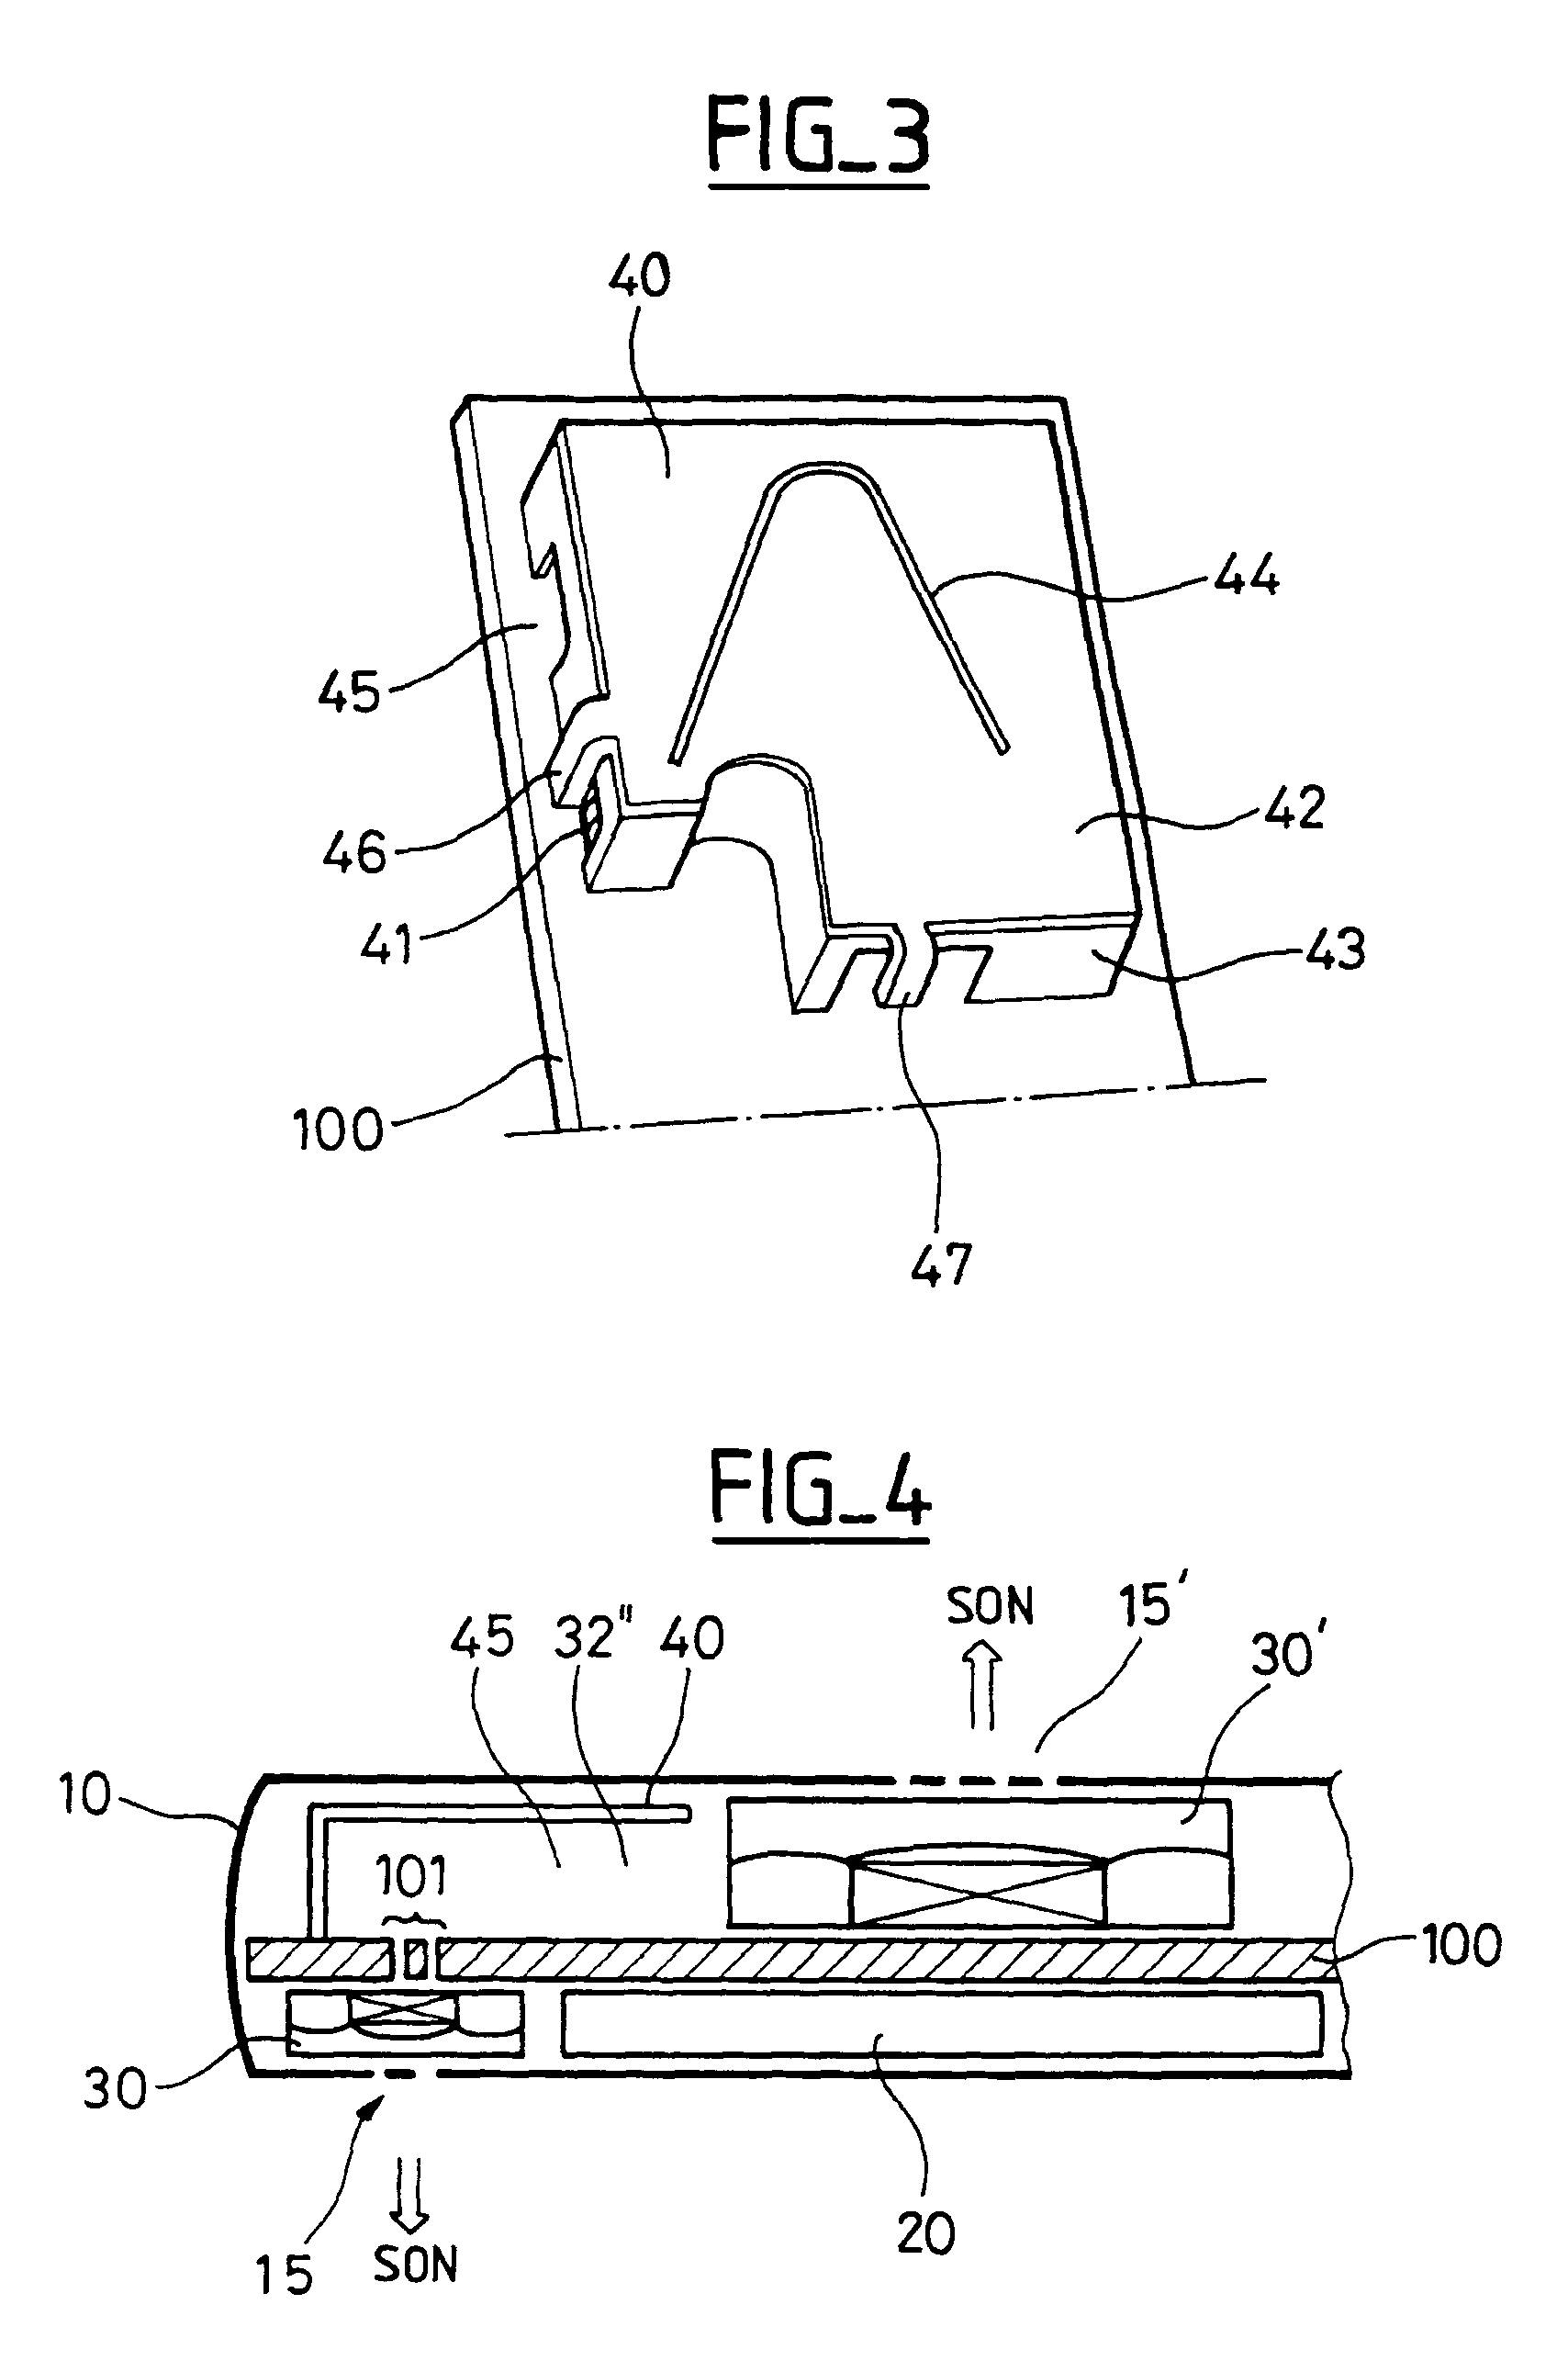 Structural arrangement for a radio communication terminal incorporating a loudspeaker and an earpiece